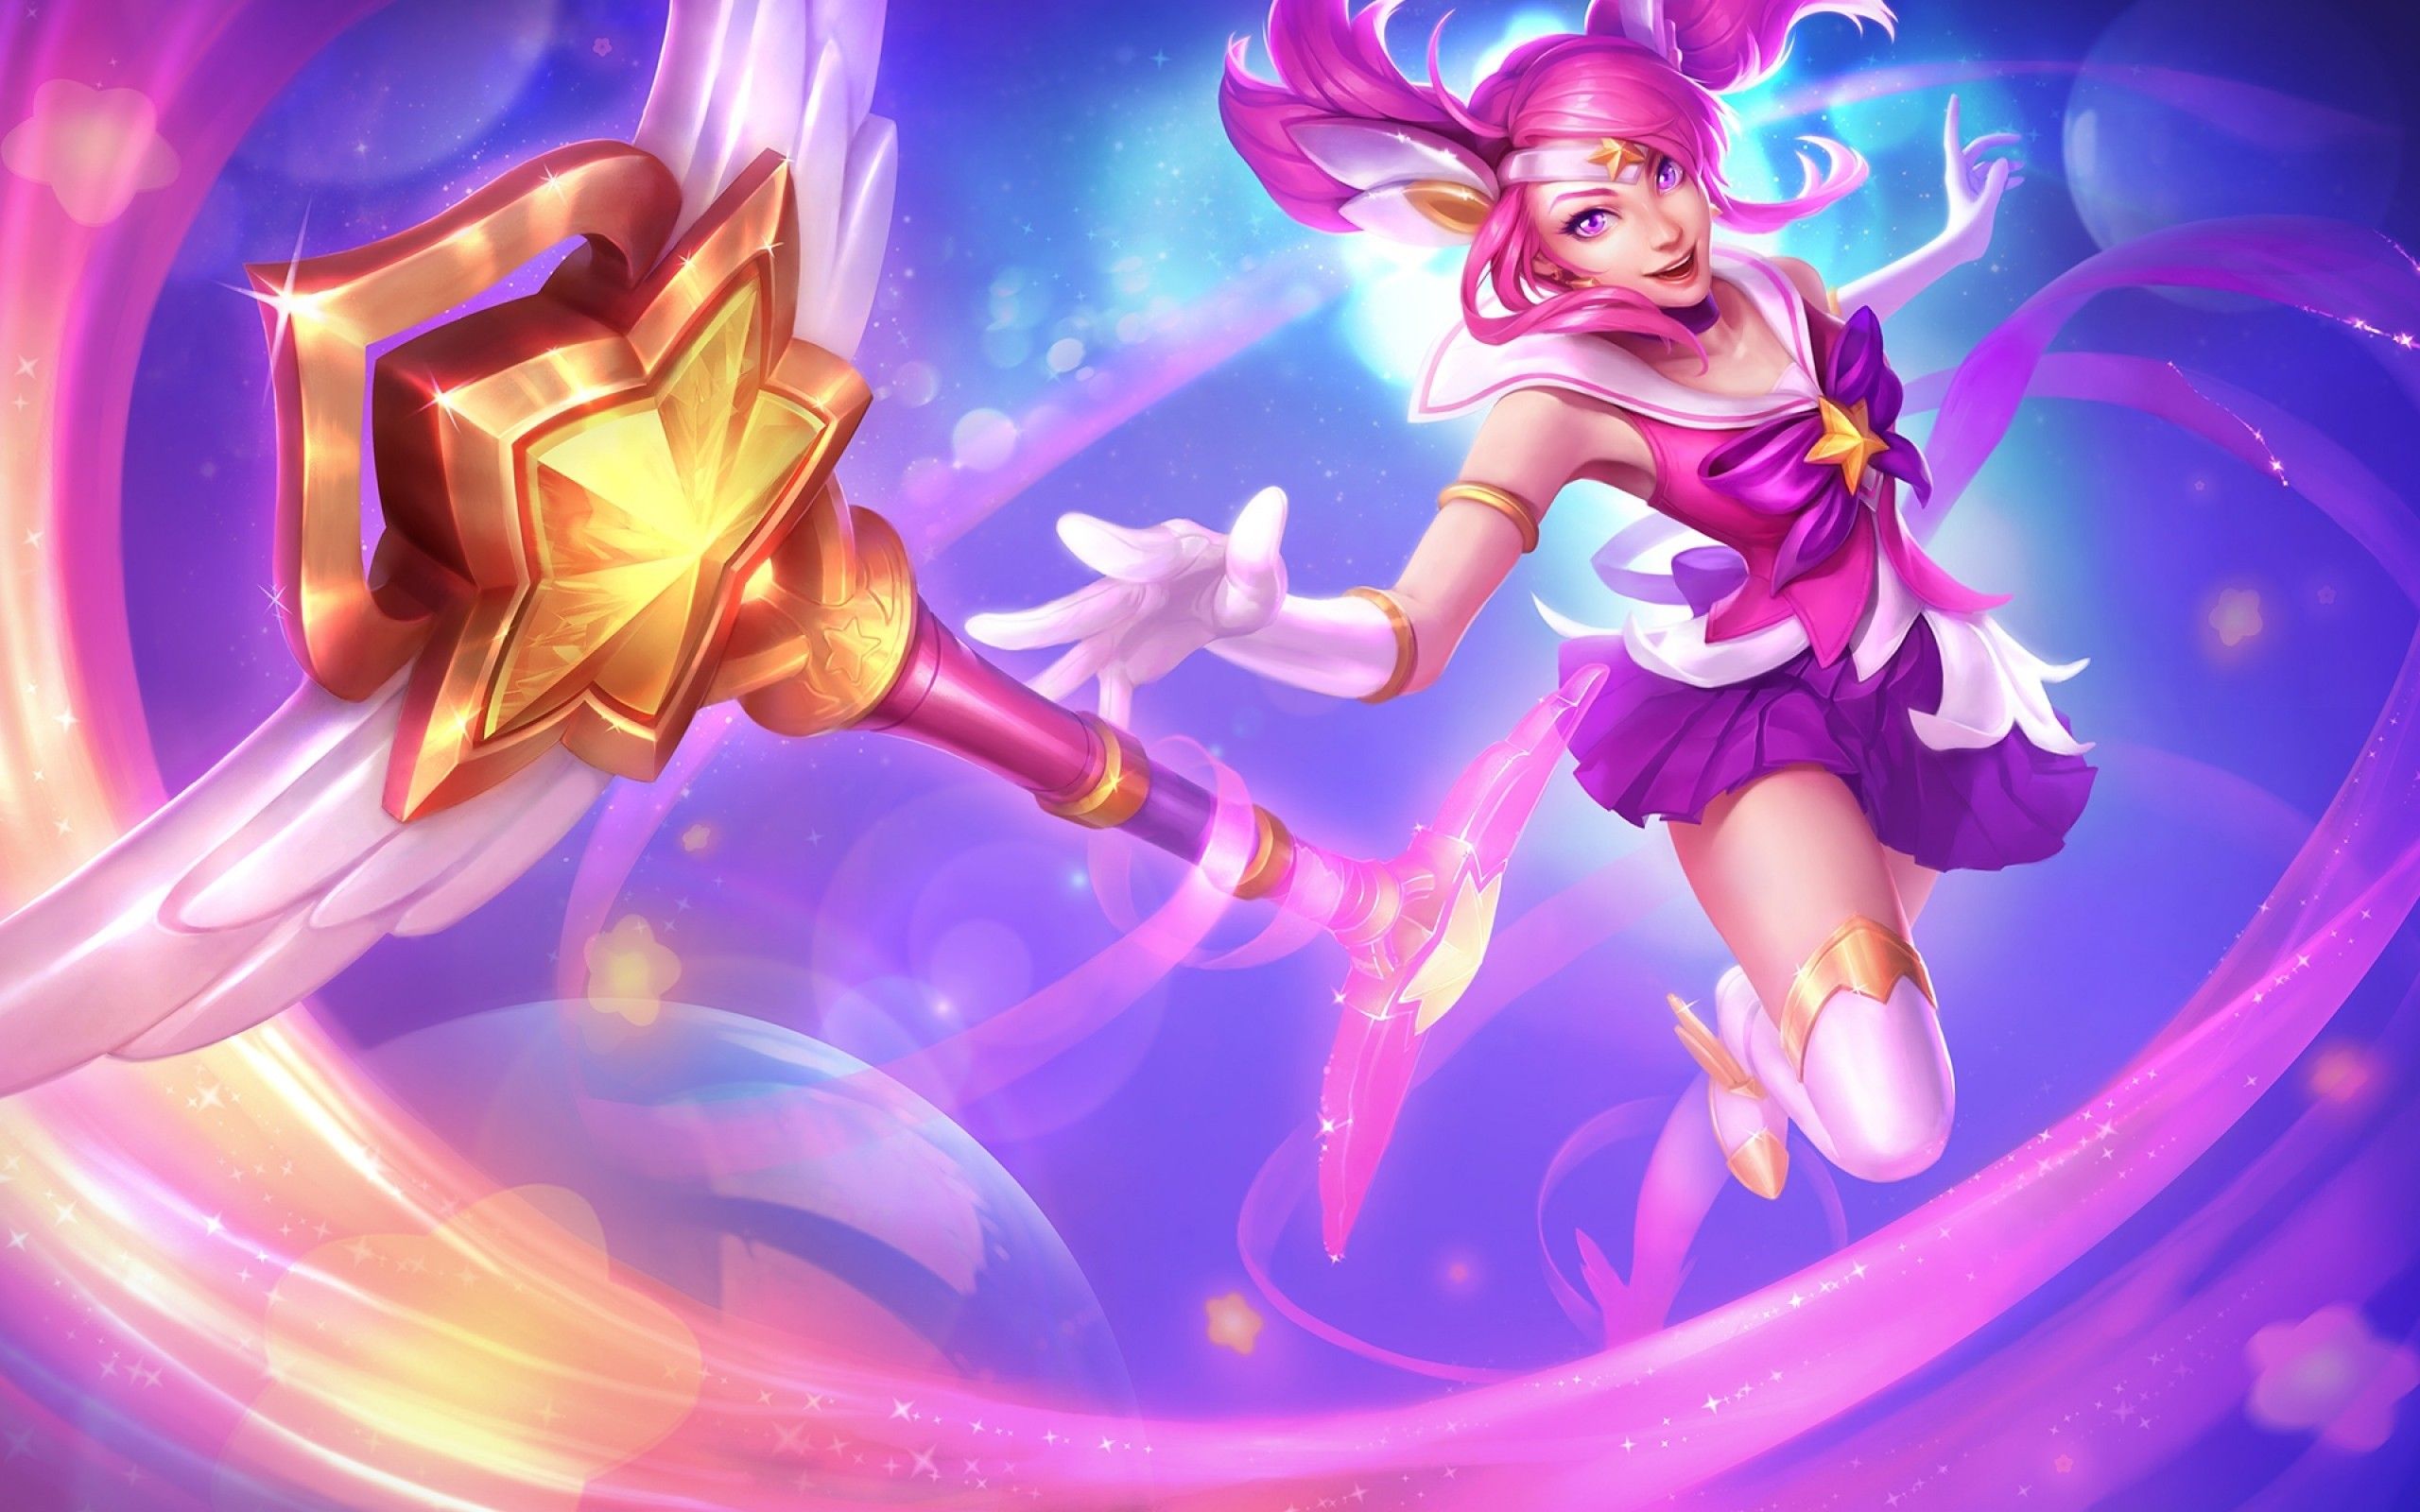 Download 2560x1600 League Of Legends, Lux, Staff, Pink Hair, Lol Wallpaper for MacBook Pro 13 inch